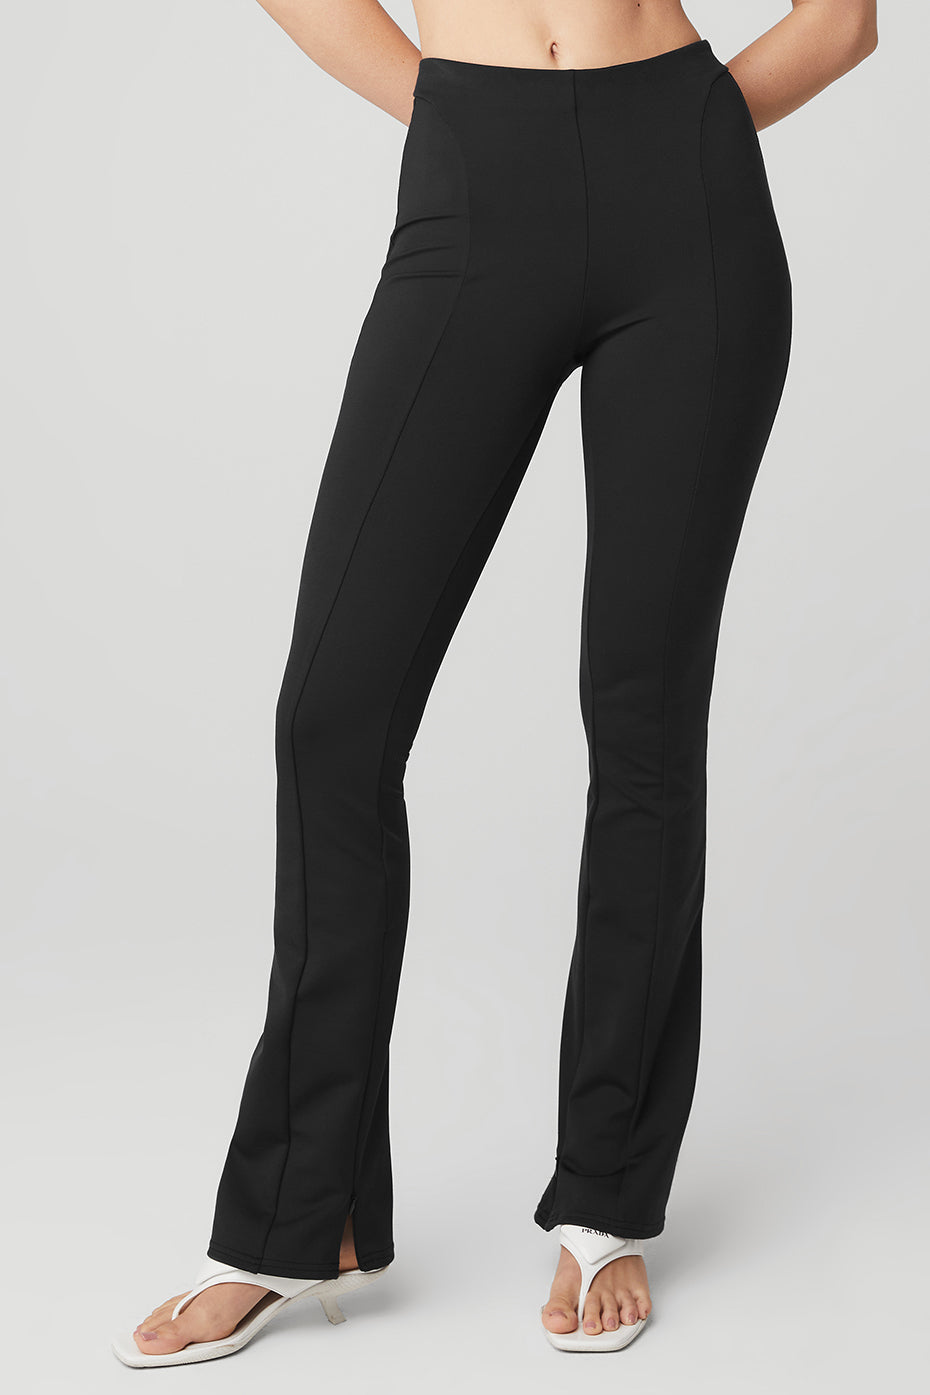 Alo Yoga Women's Alo High Waist 7/8 Zip It Flare Legging, Black, X-Small :  : Clothing, Shoes & Accessories